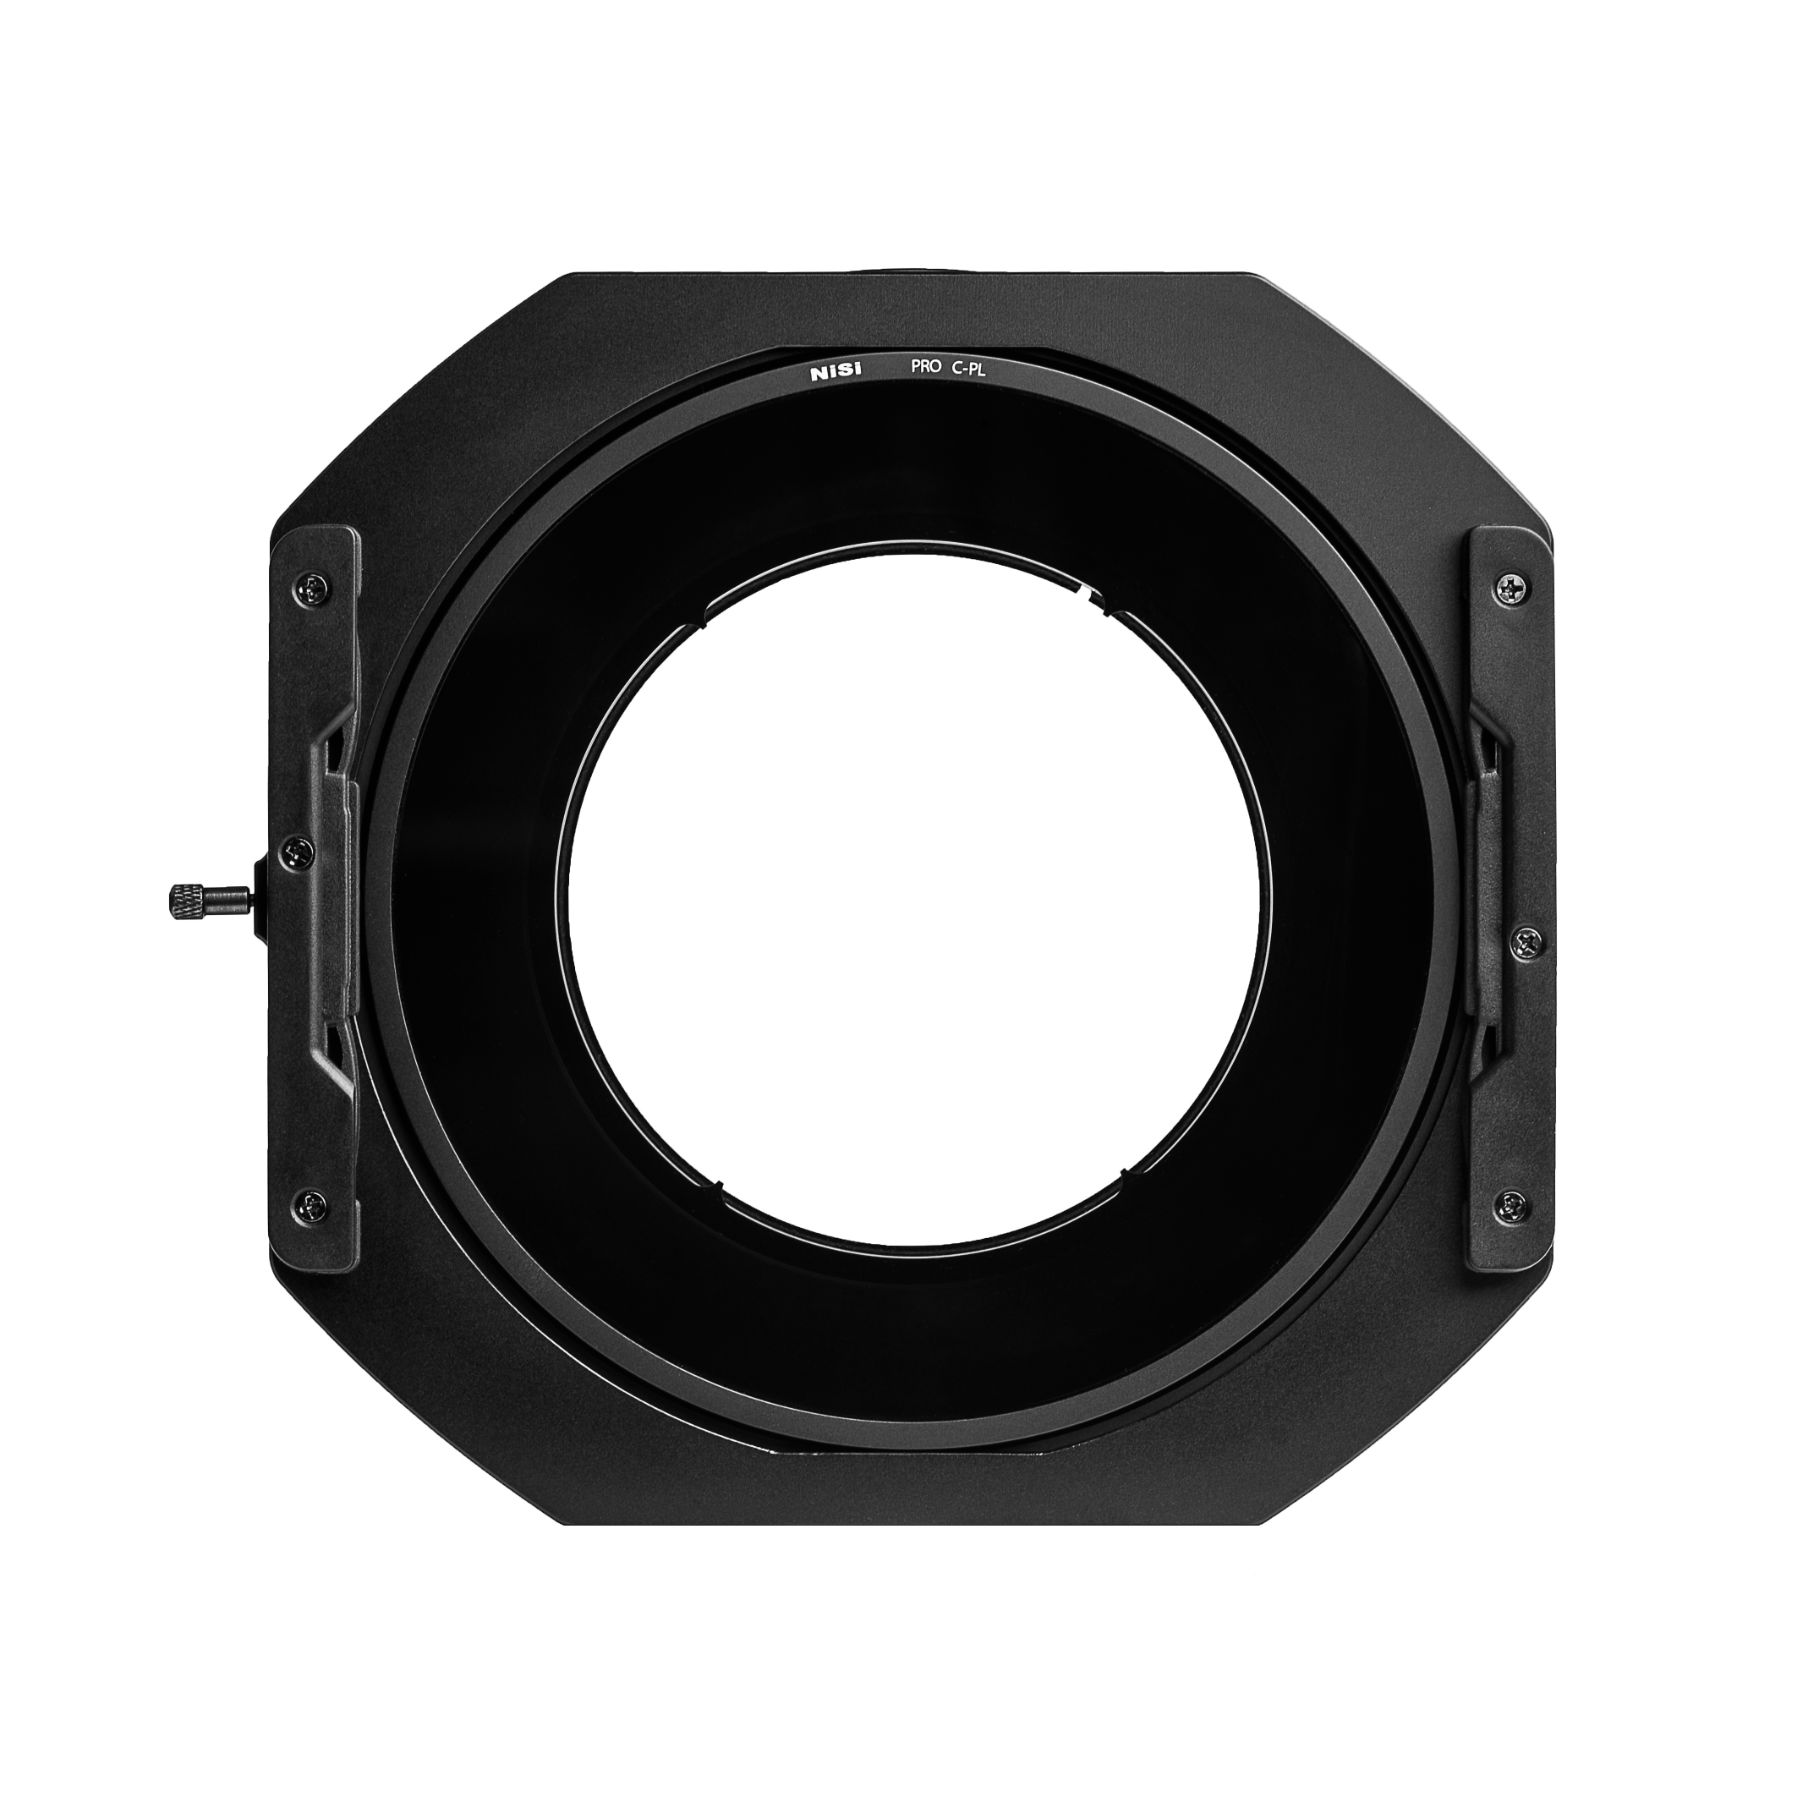 Black NIP-FH150-S5-EN-SO1224 NiSi 150mm Filter Holder for Sony 12-24mm F/4 Lens with Landscape CPL S5 for Ultra Wide Lenses from Ikan